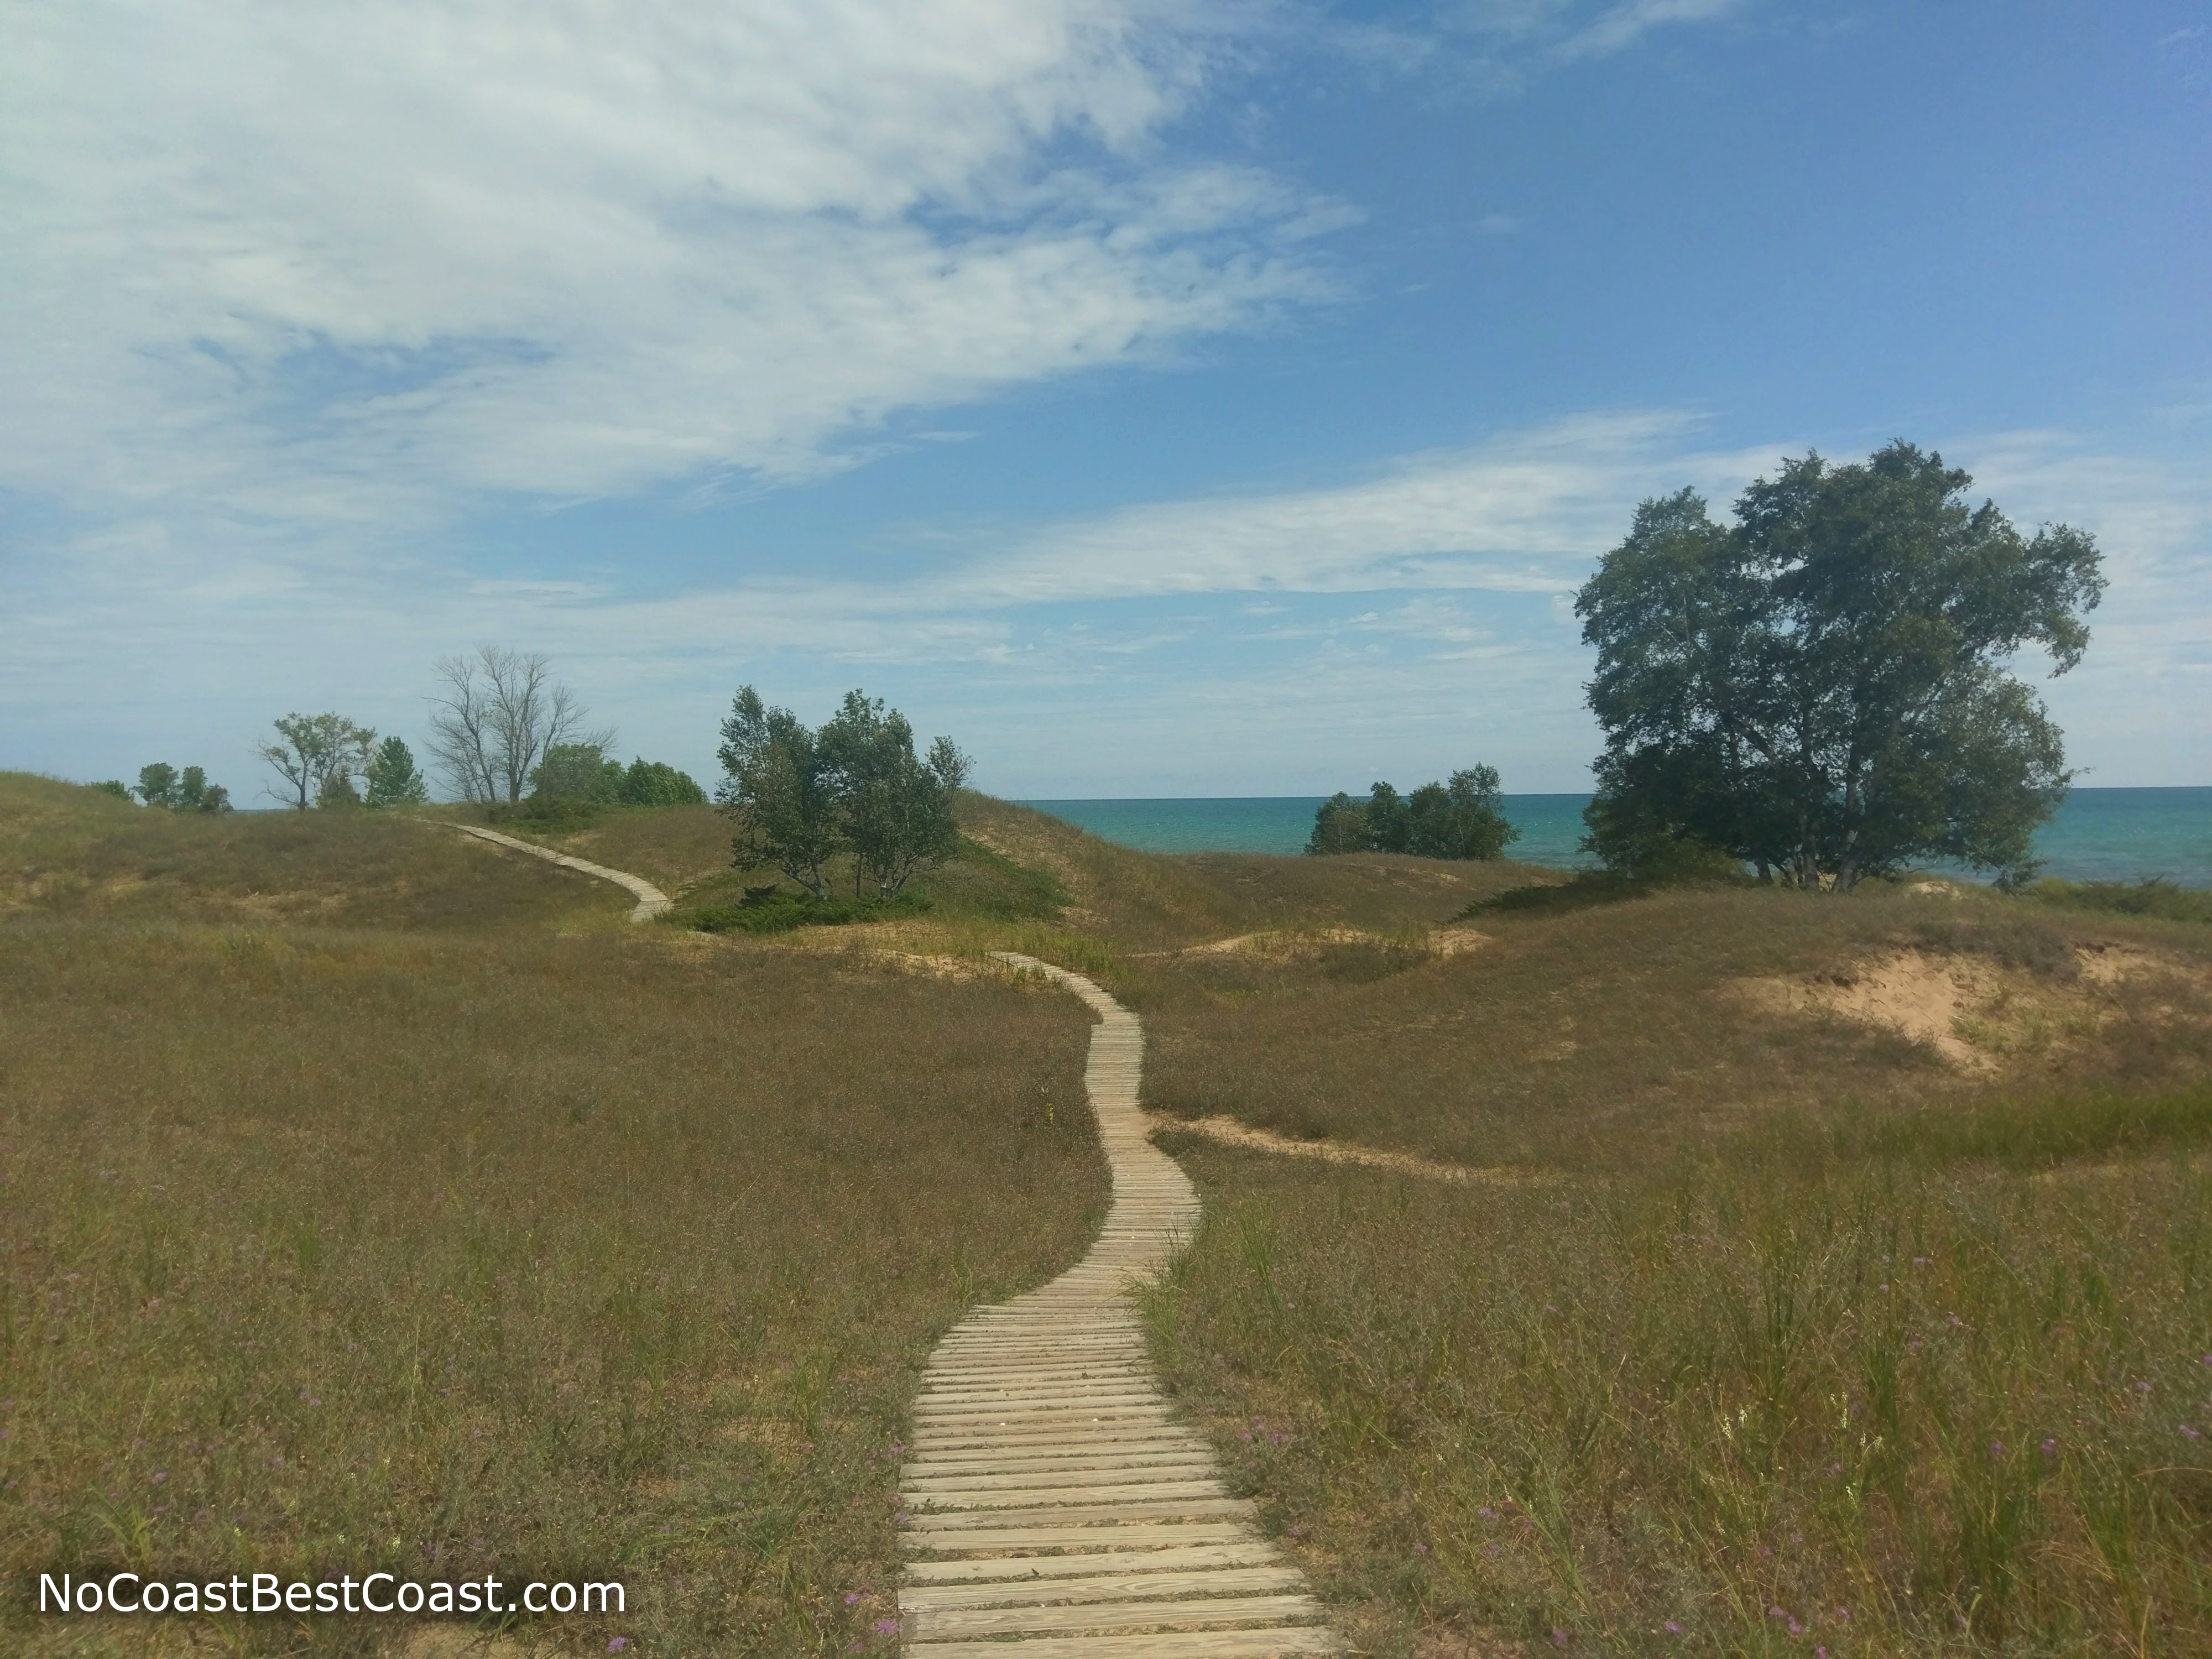 The cordwalk extending across the dunes with Lake Michigan in the background